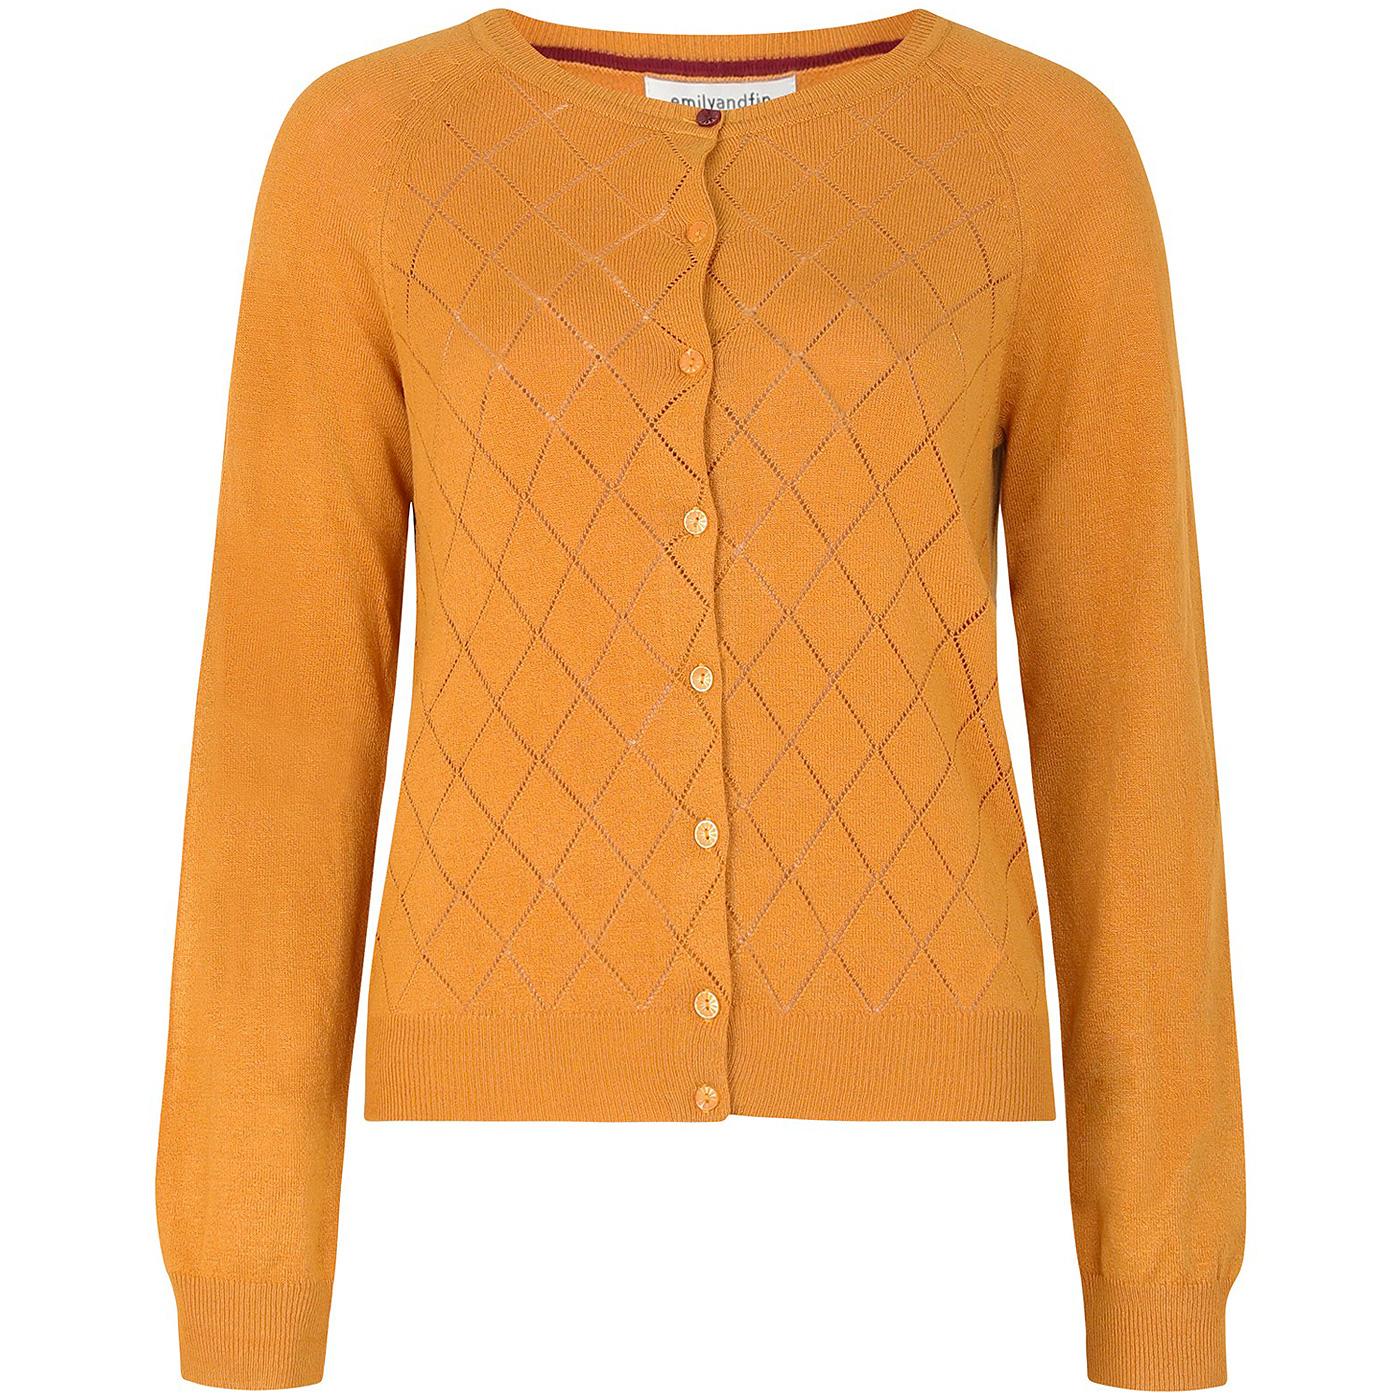 EMILY AND FIN Tess Retro Argyle Pointelle Cardigan in Ochre